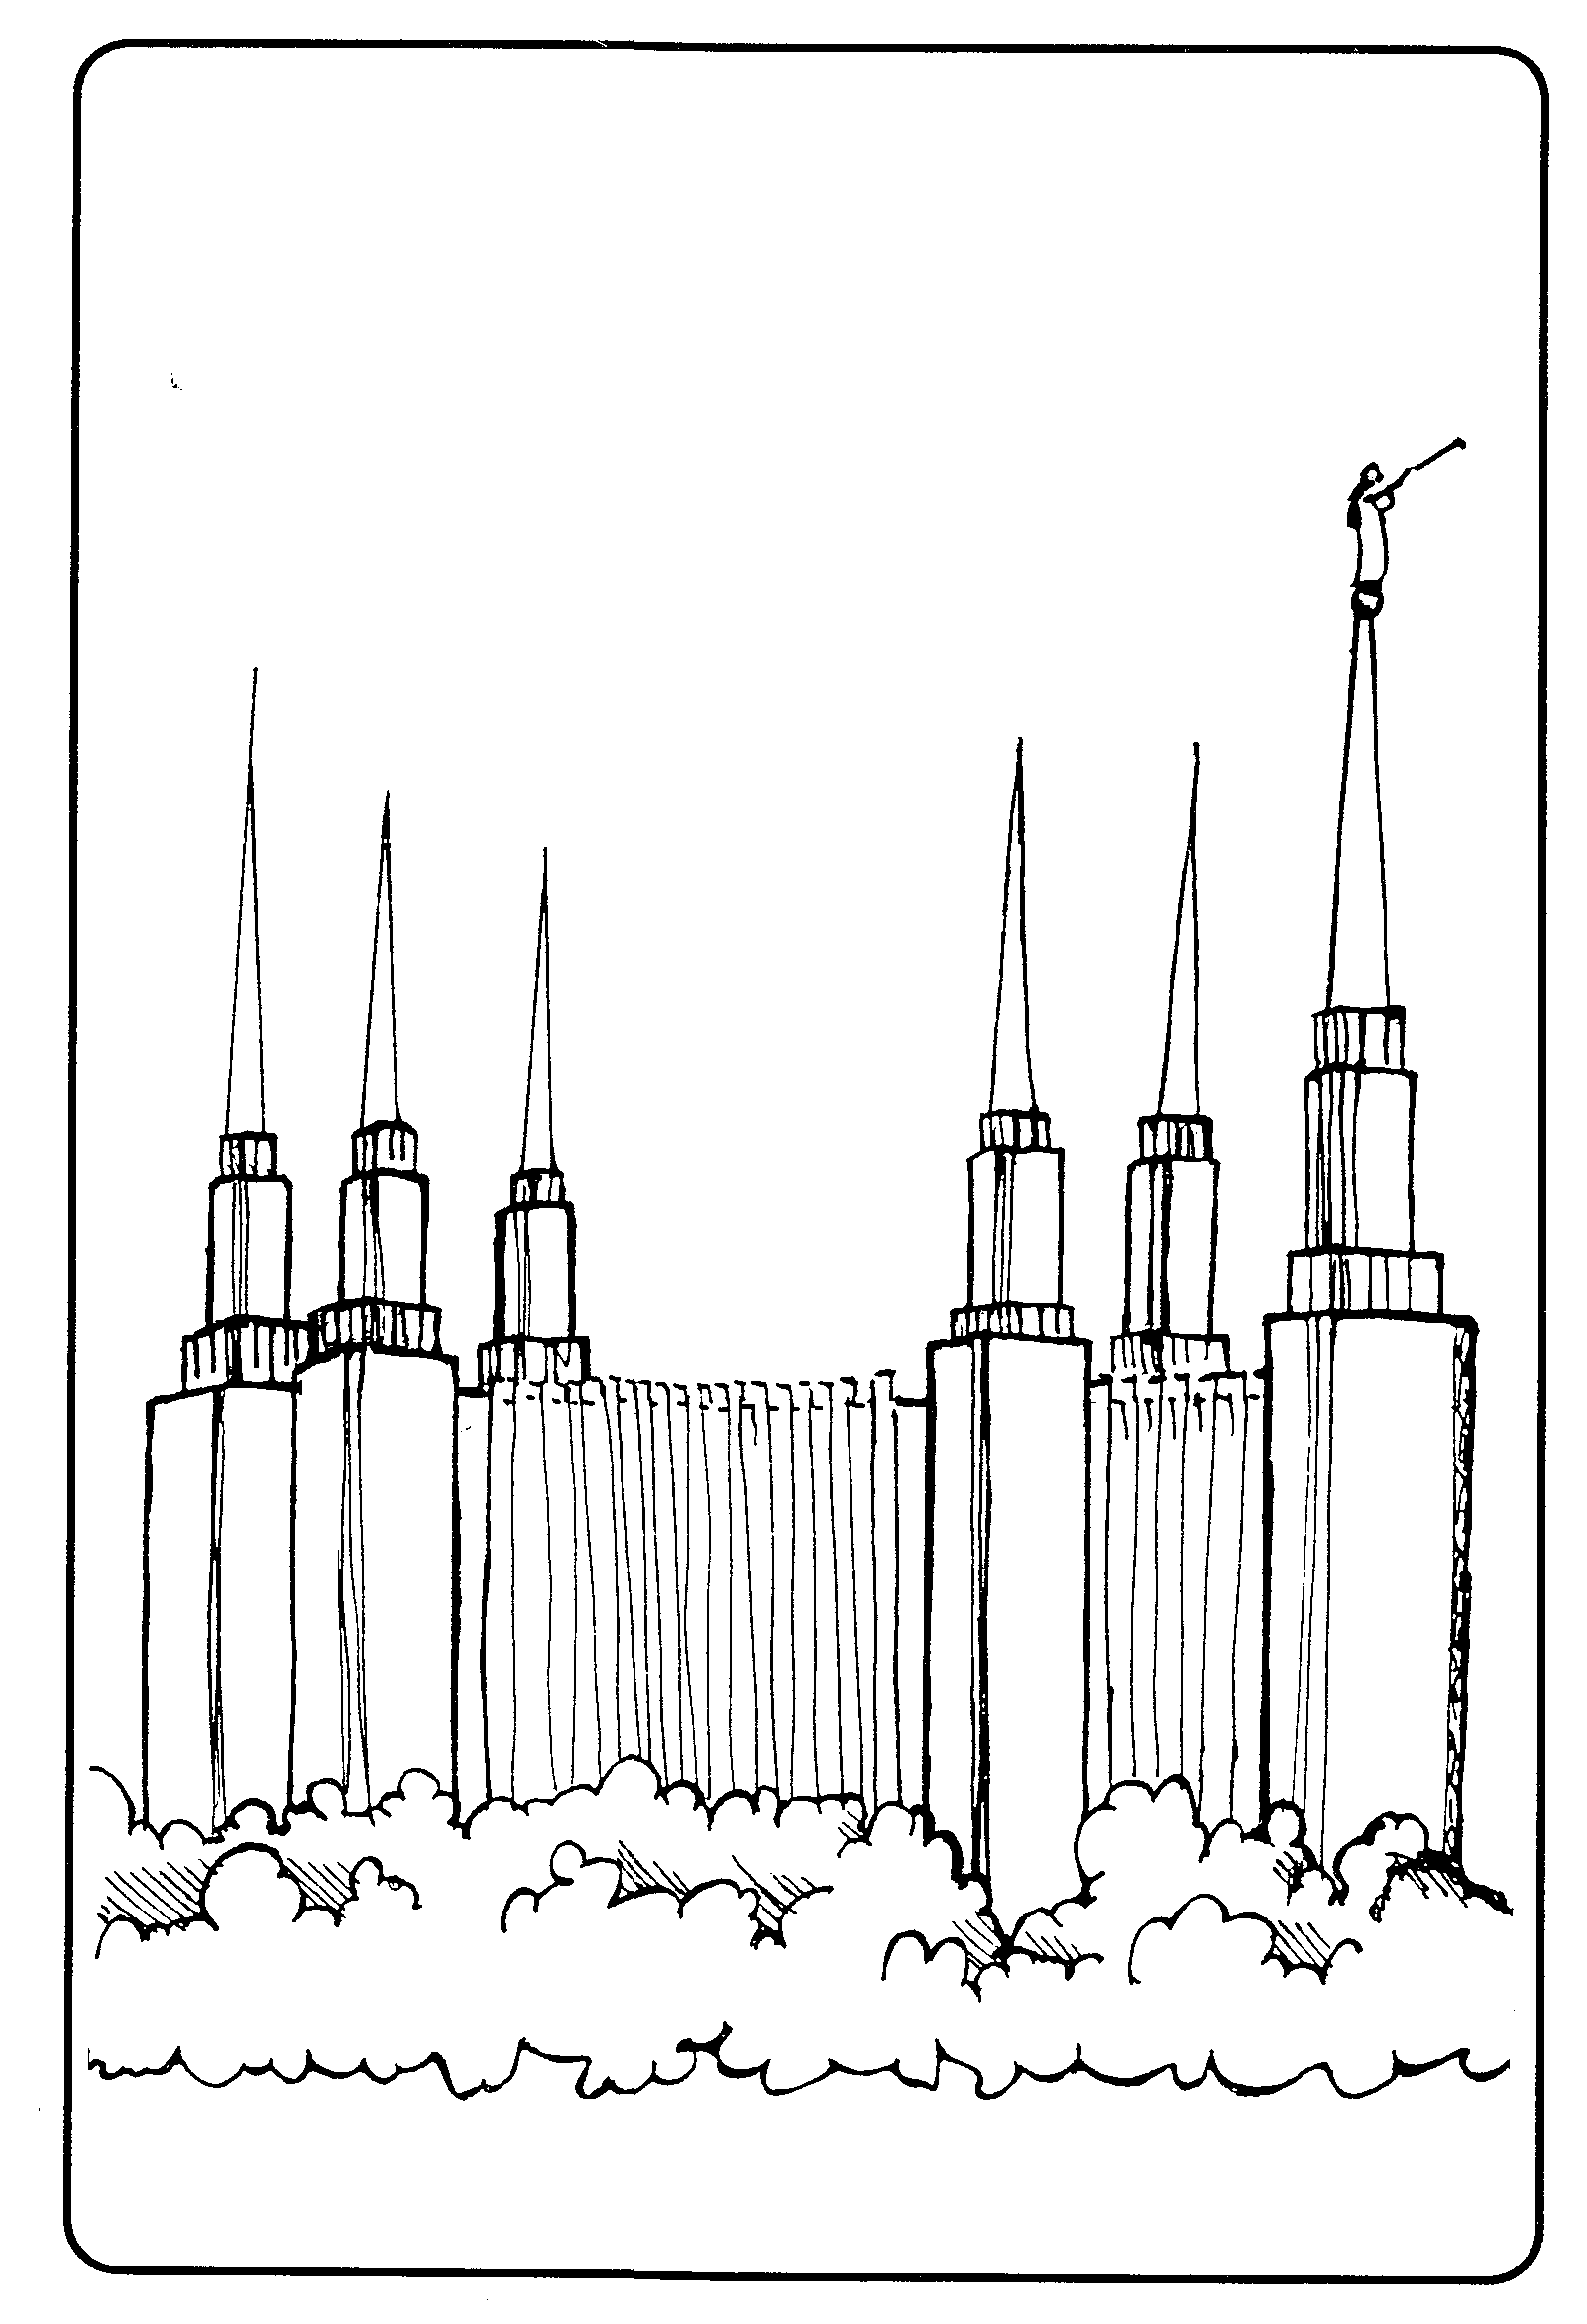 10 Pics of LDS Temple Coloring Pages - Temple Coloring Page, Salt ...